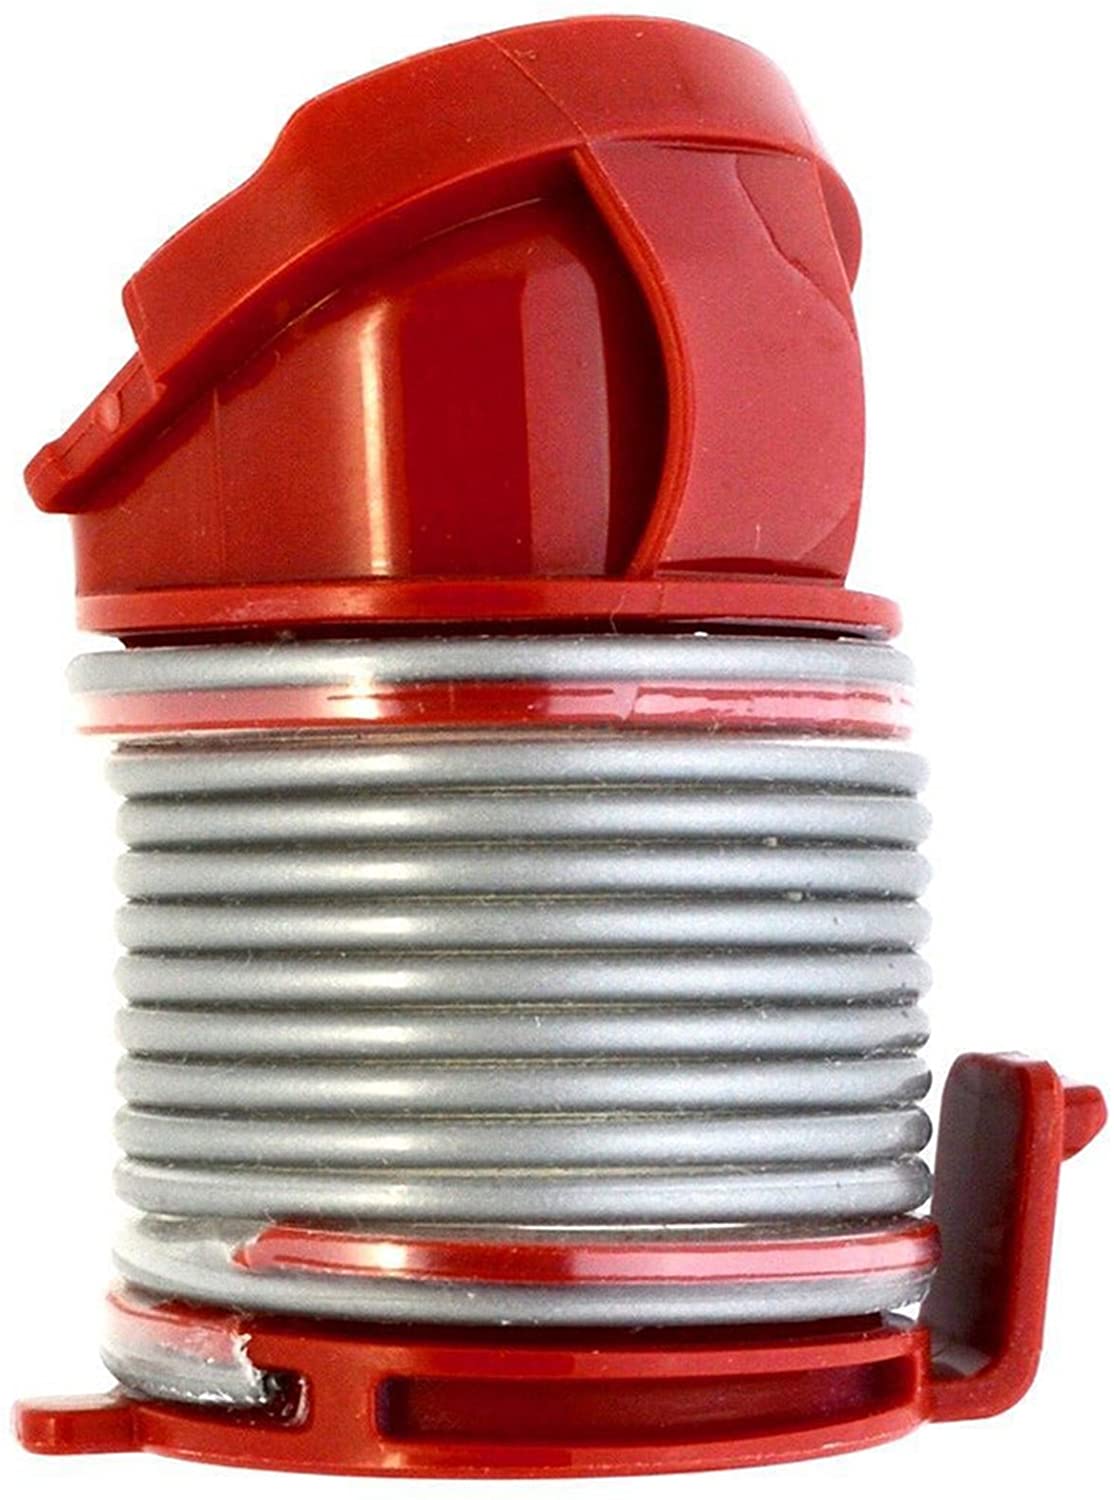 Short Internal Hose for DYSON DC50 Vacuum Cleaner (Silver/Red)